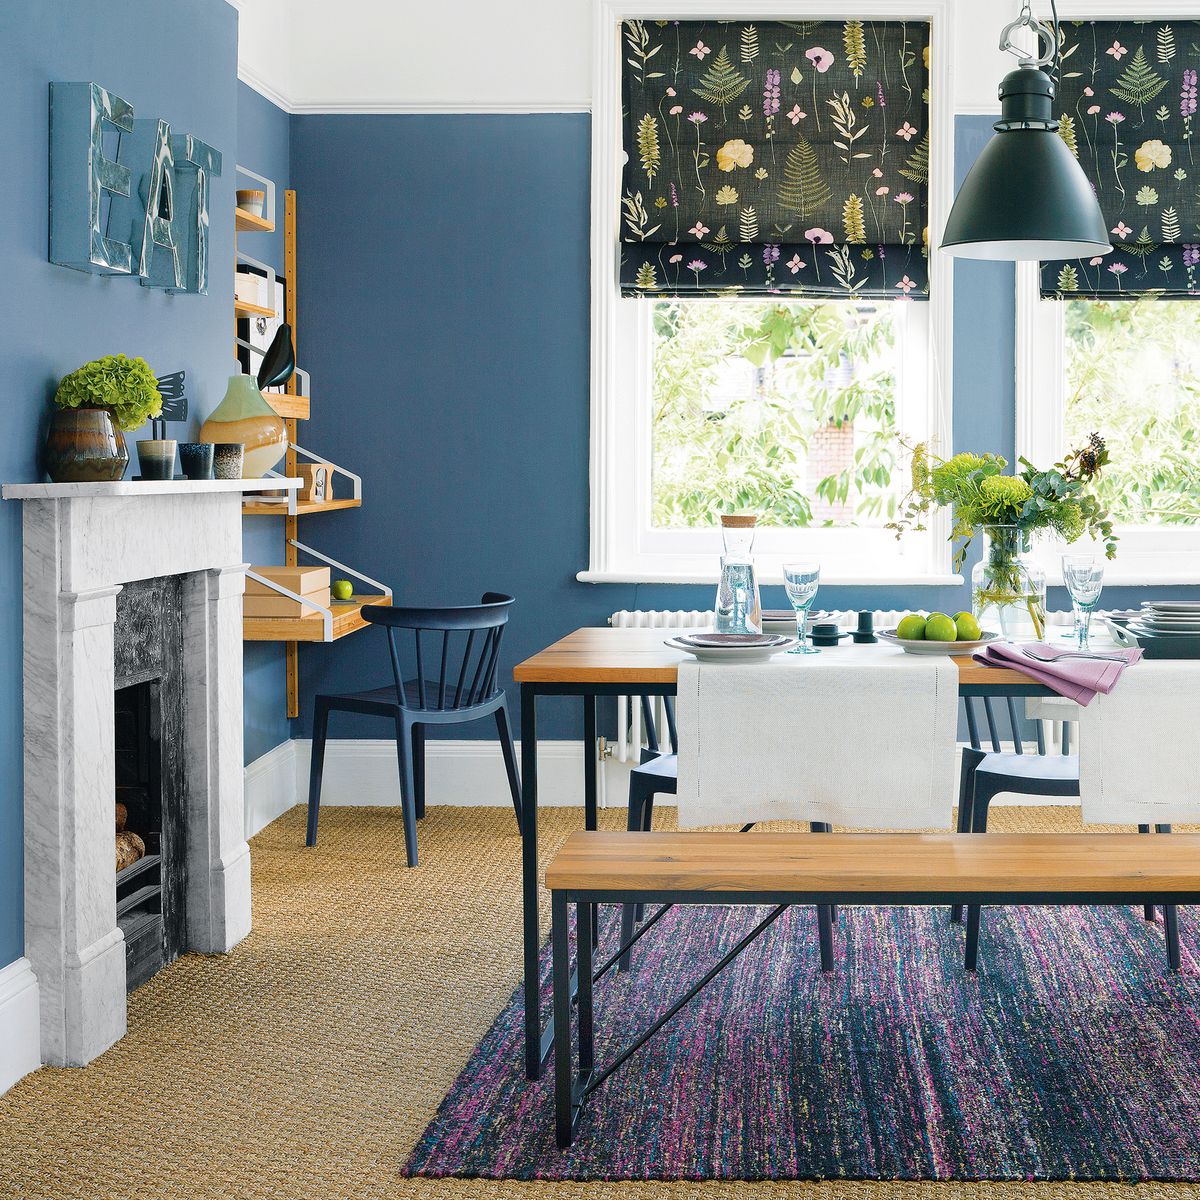 How to stop a rug from moving on carpet once and for all | Ideal Home